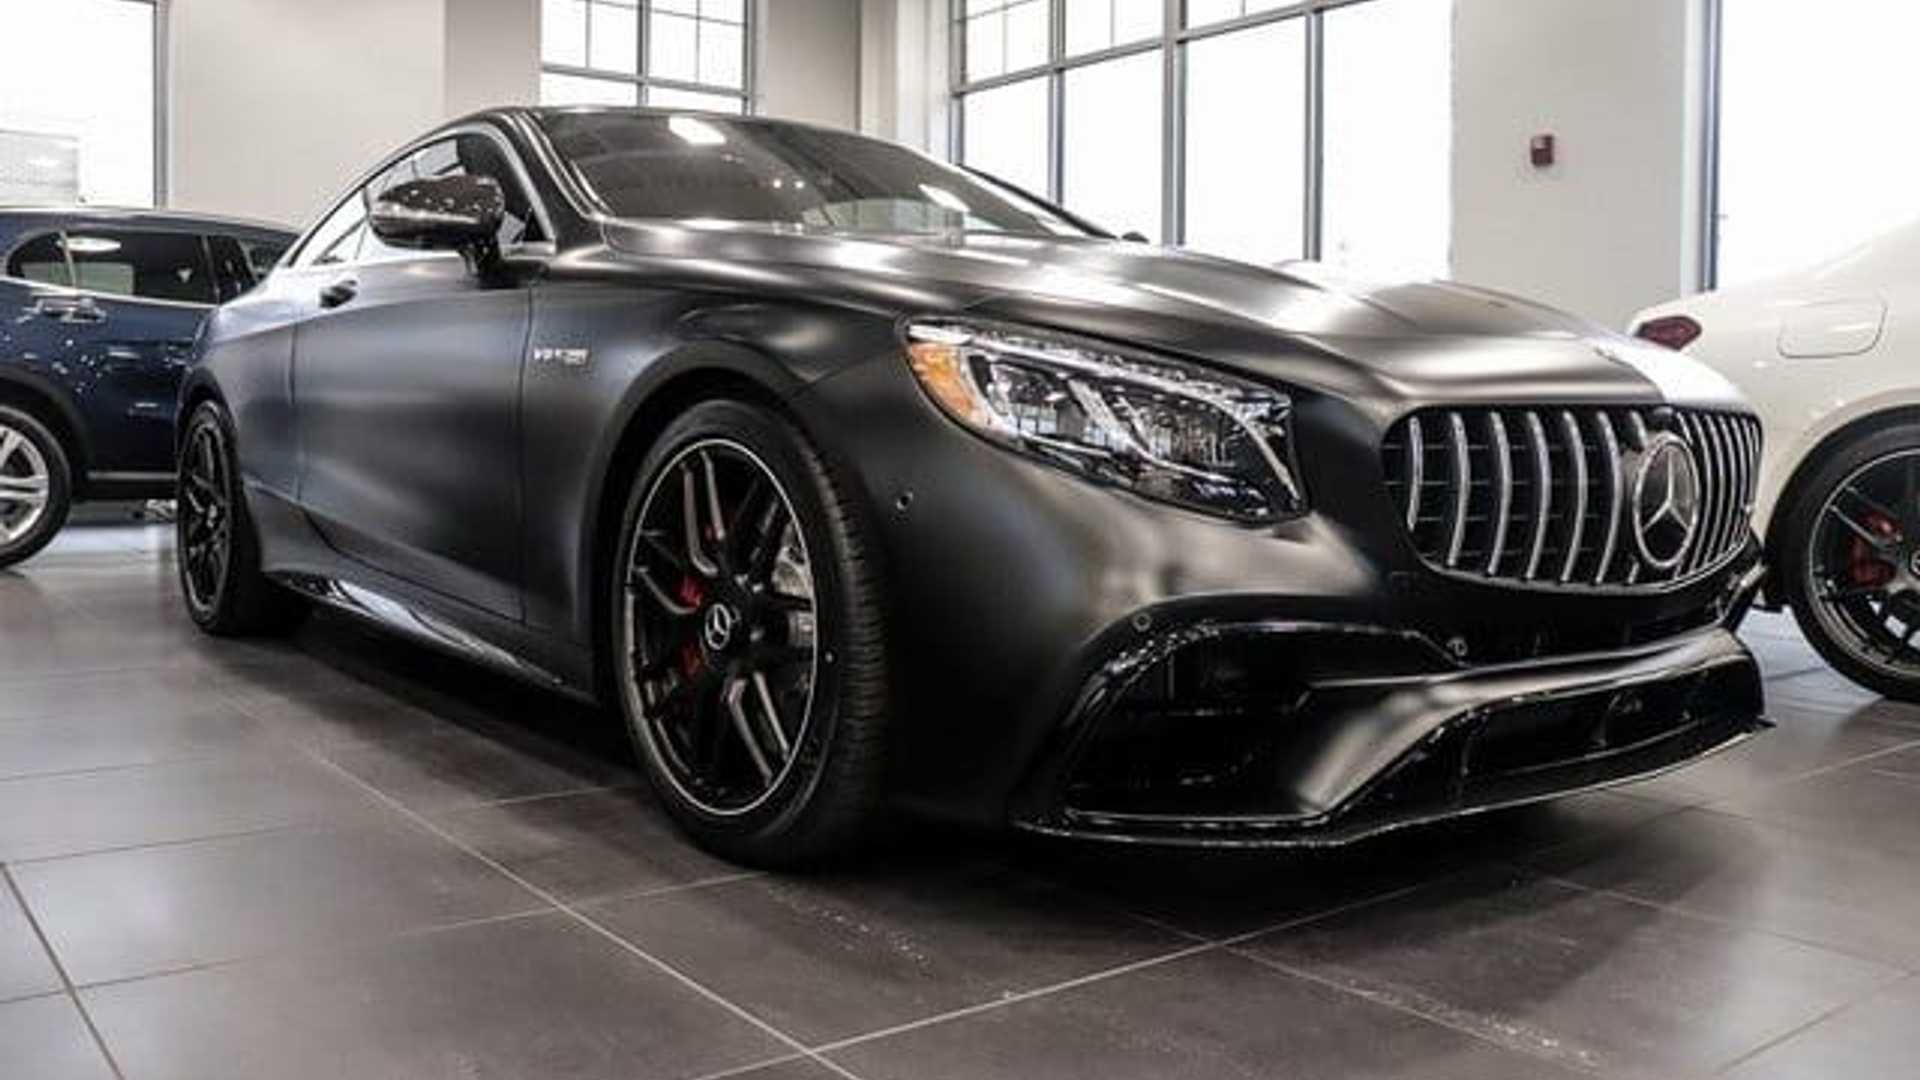 2020 Mercedes-AMG S63 4Matic+ Coupe in designo Night Black For Sale